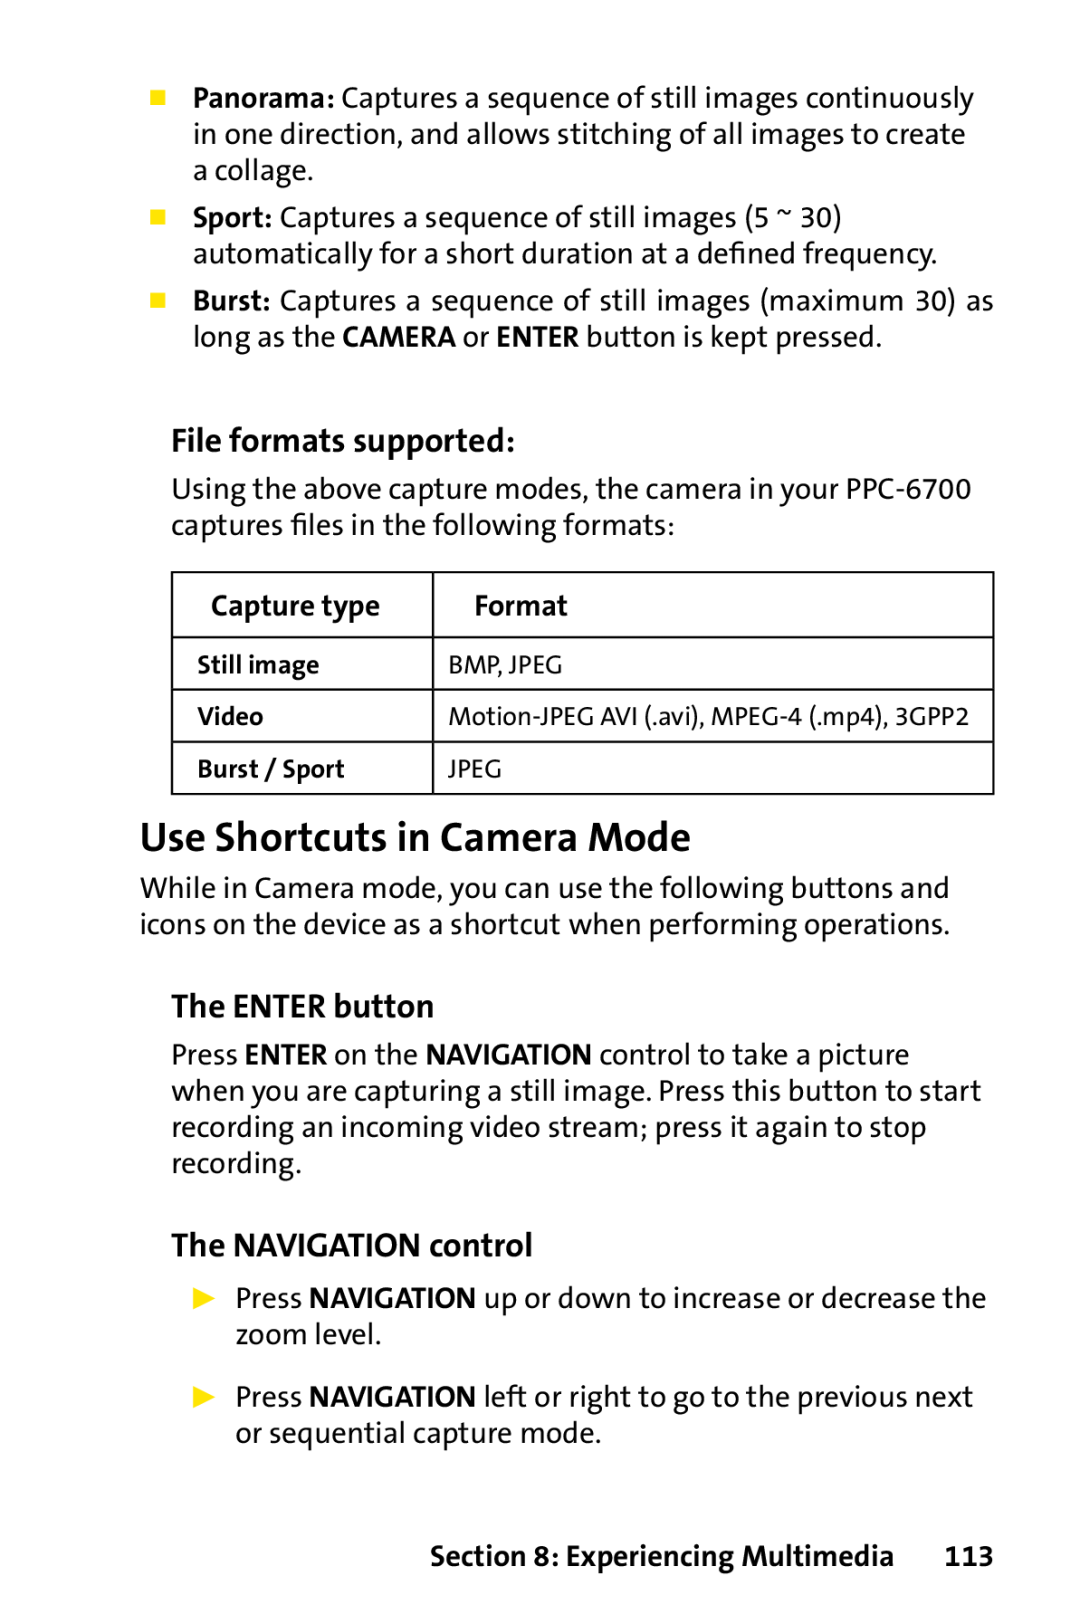 Sprint Nextel PPC-6700 Use Shortcuts in Camera Mode, File formats supported, The ENTER button, The NAVIGATION control 